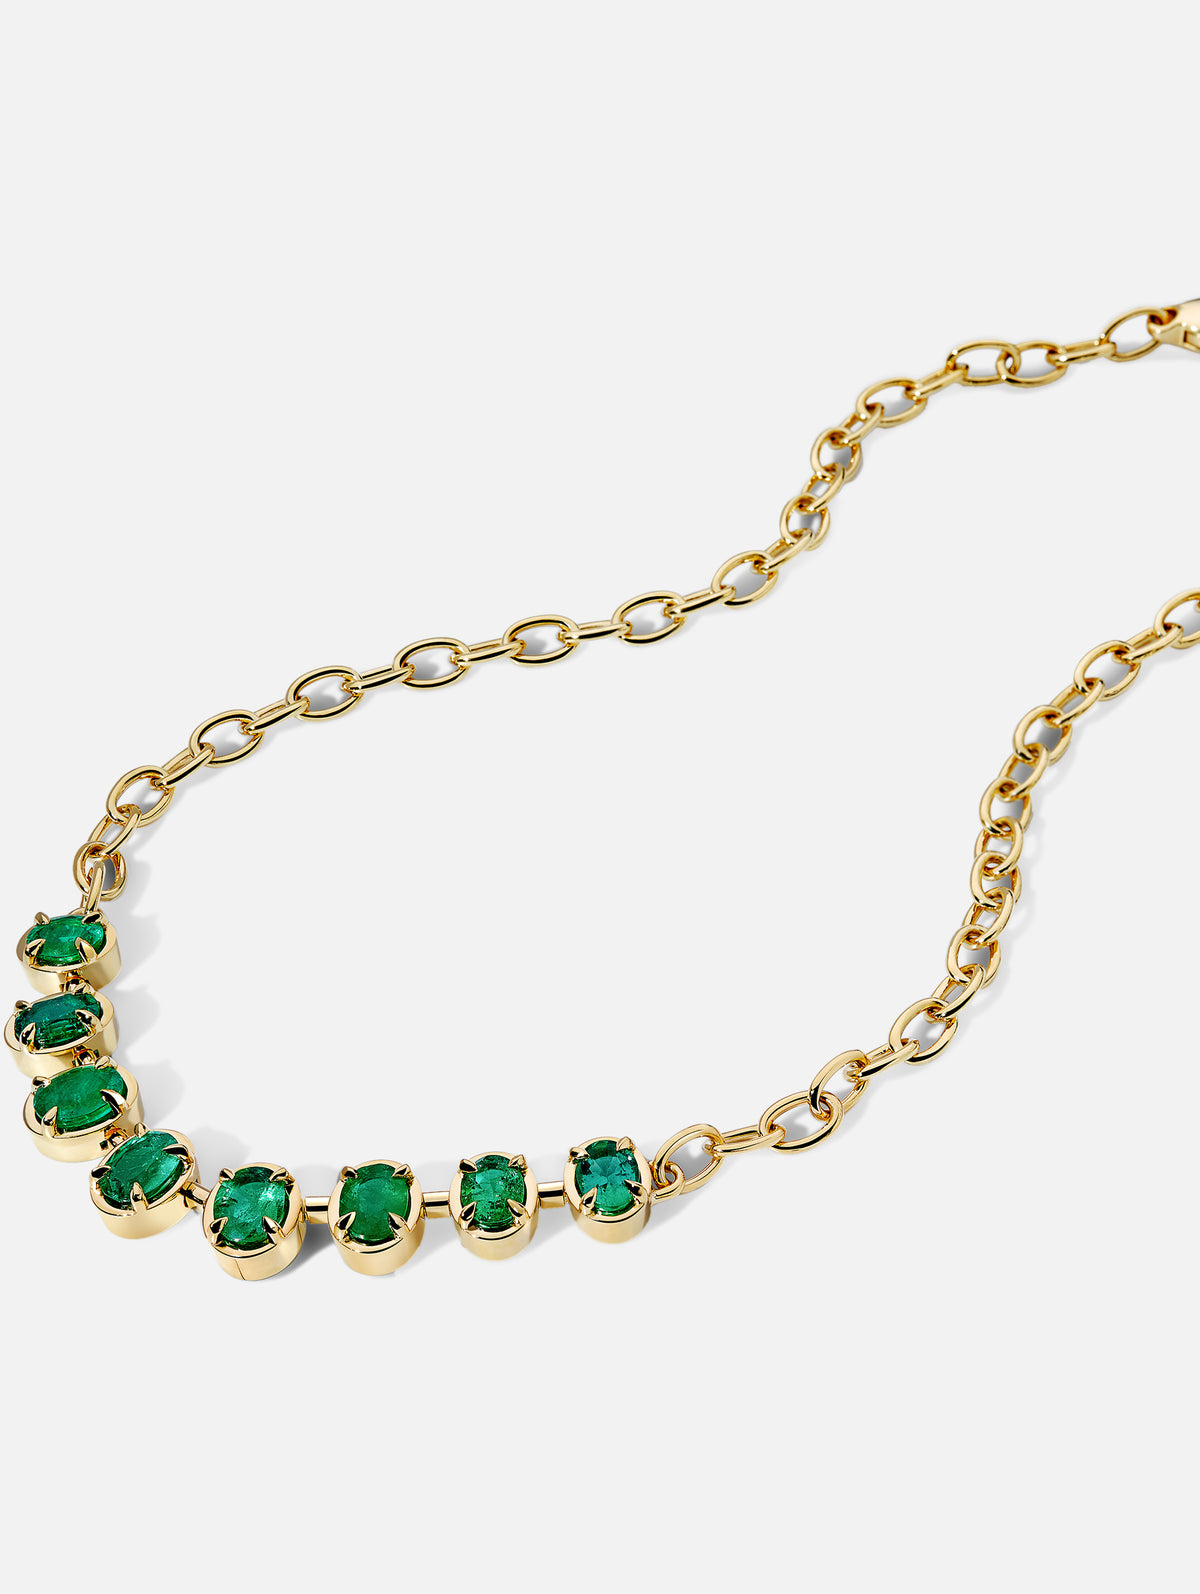 view 2 - Oval Emerald Necklace